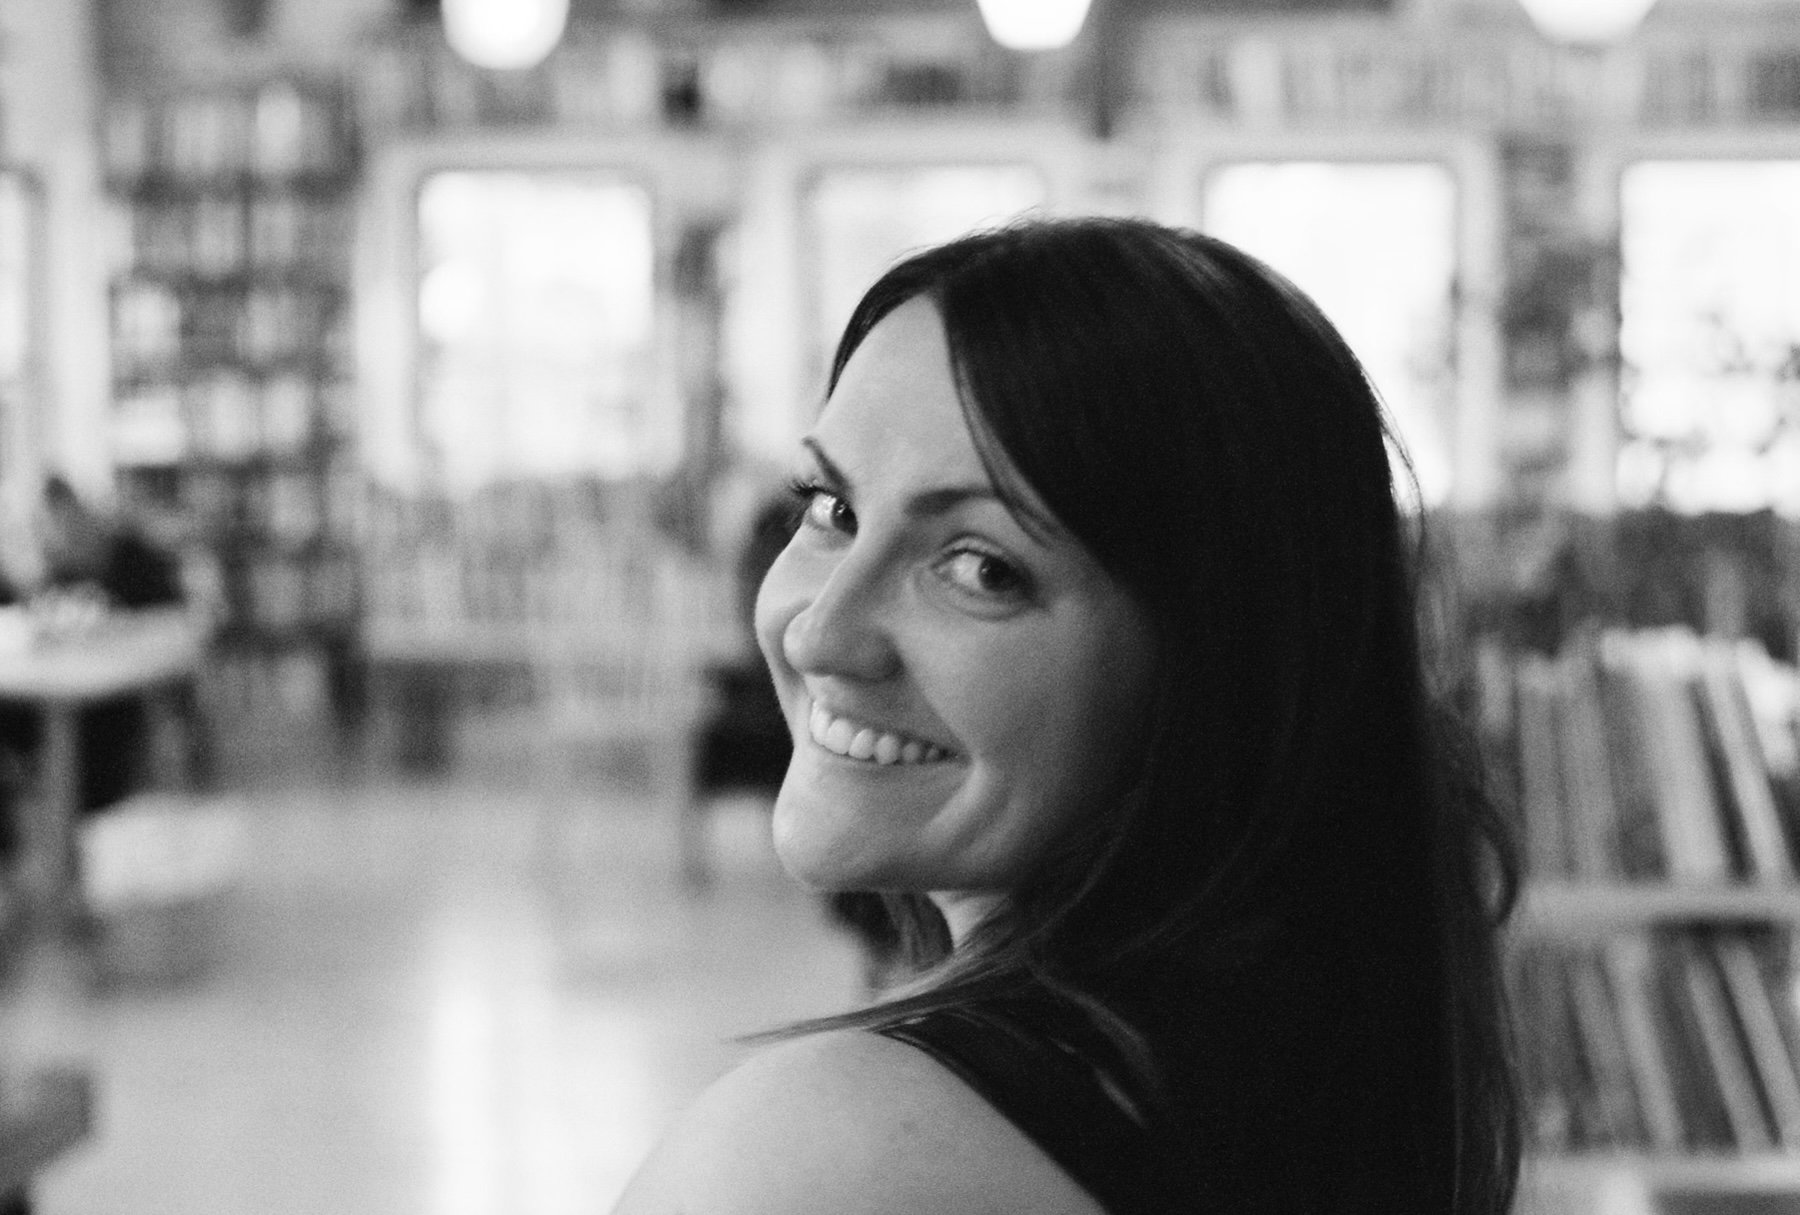 A black and white photo of the head and shoulders of a white woman with dark hair, looking back over her shoulder and smiling